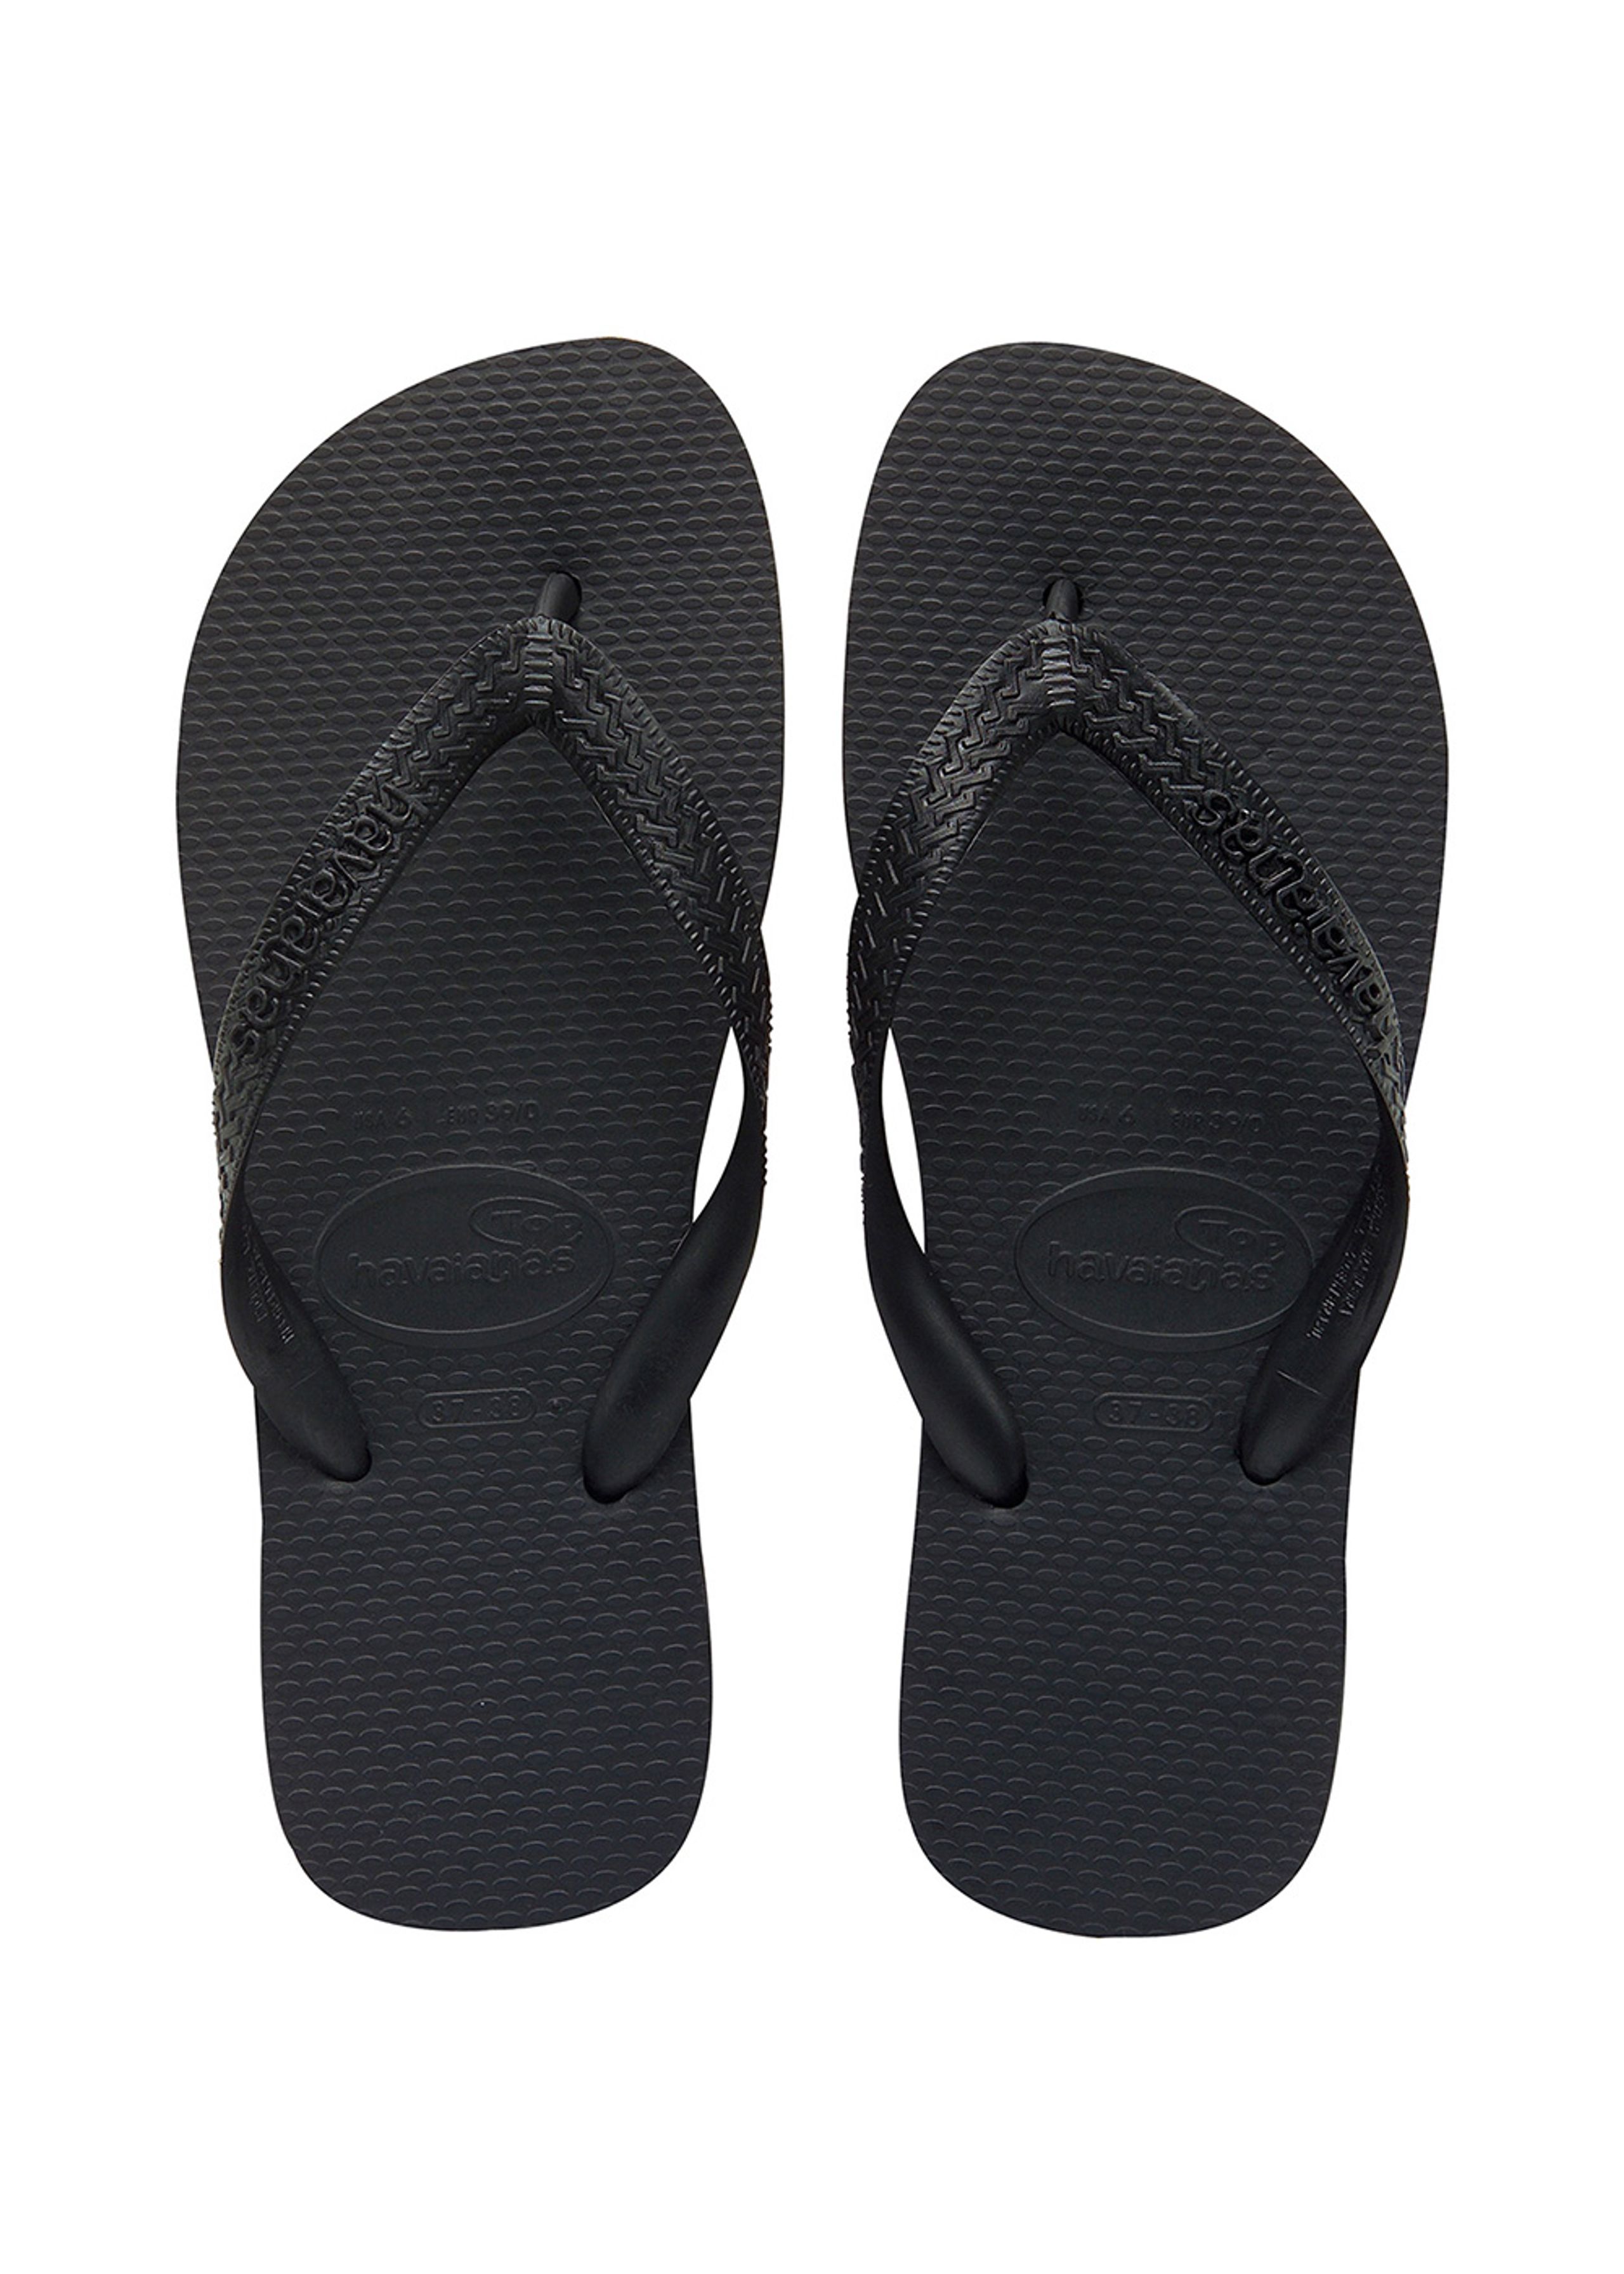 zone Forge Dated Slippers - Infradito - Havaianas